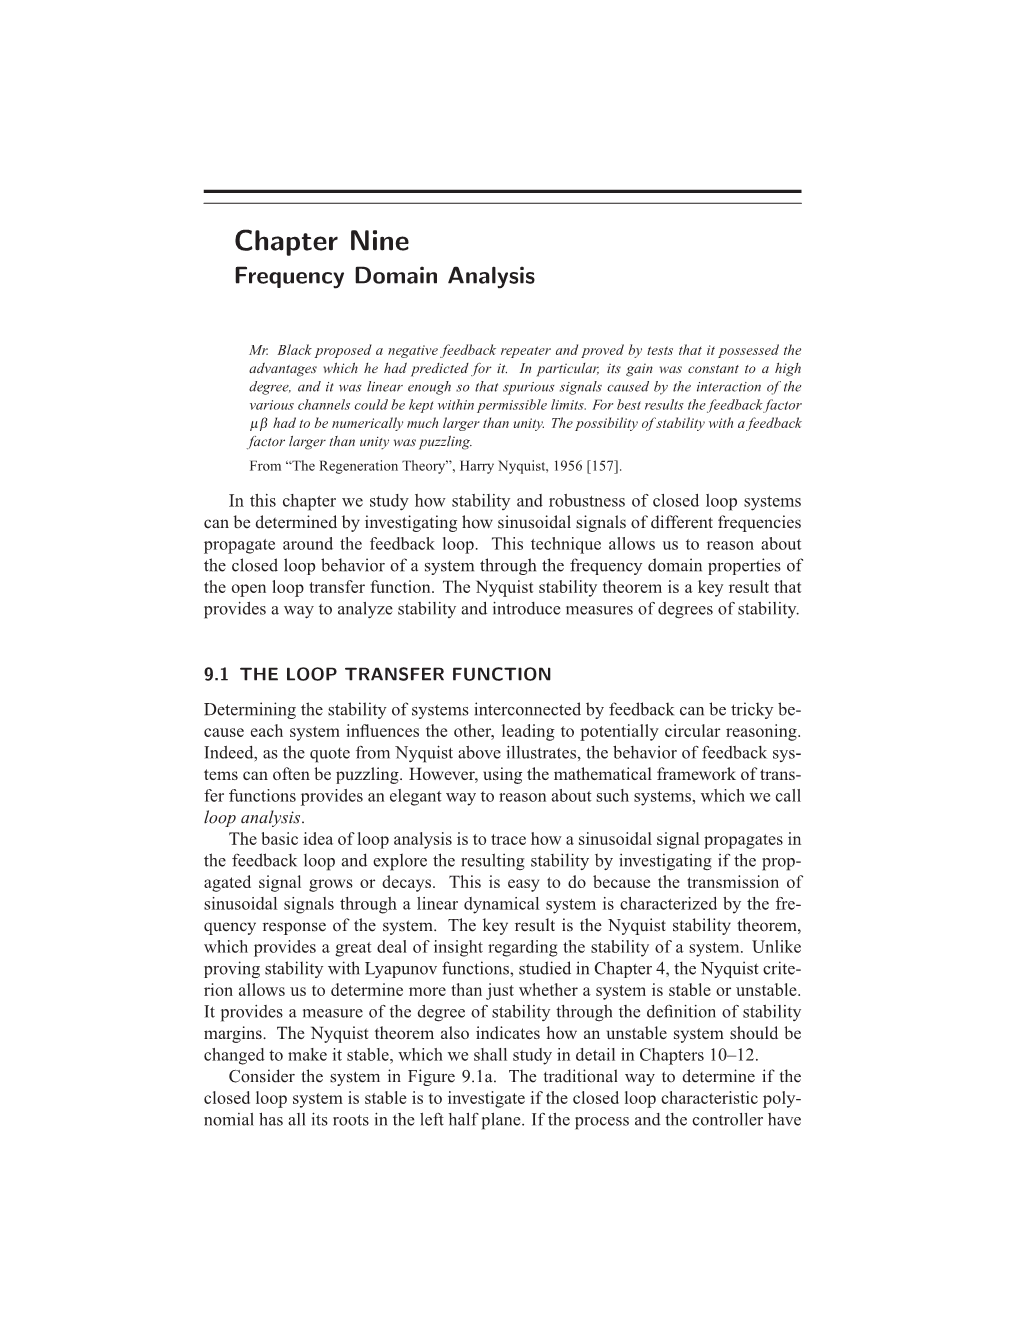 Chapter Nine Frequency Domain Analysis